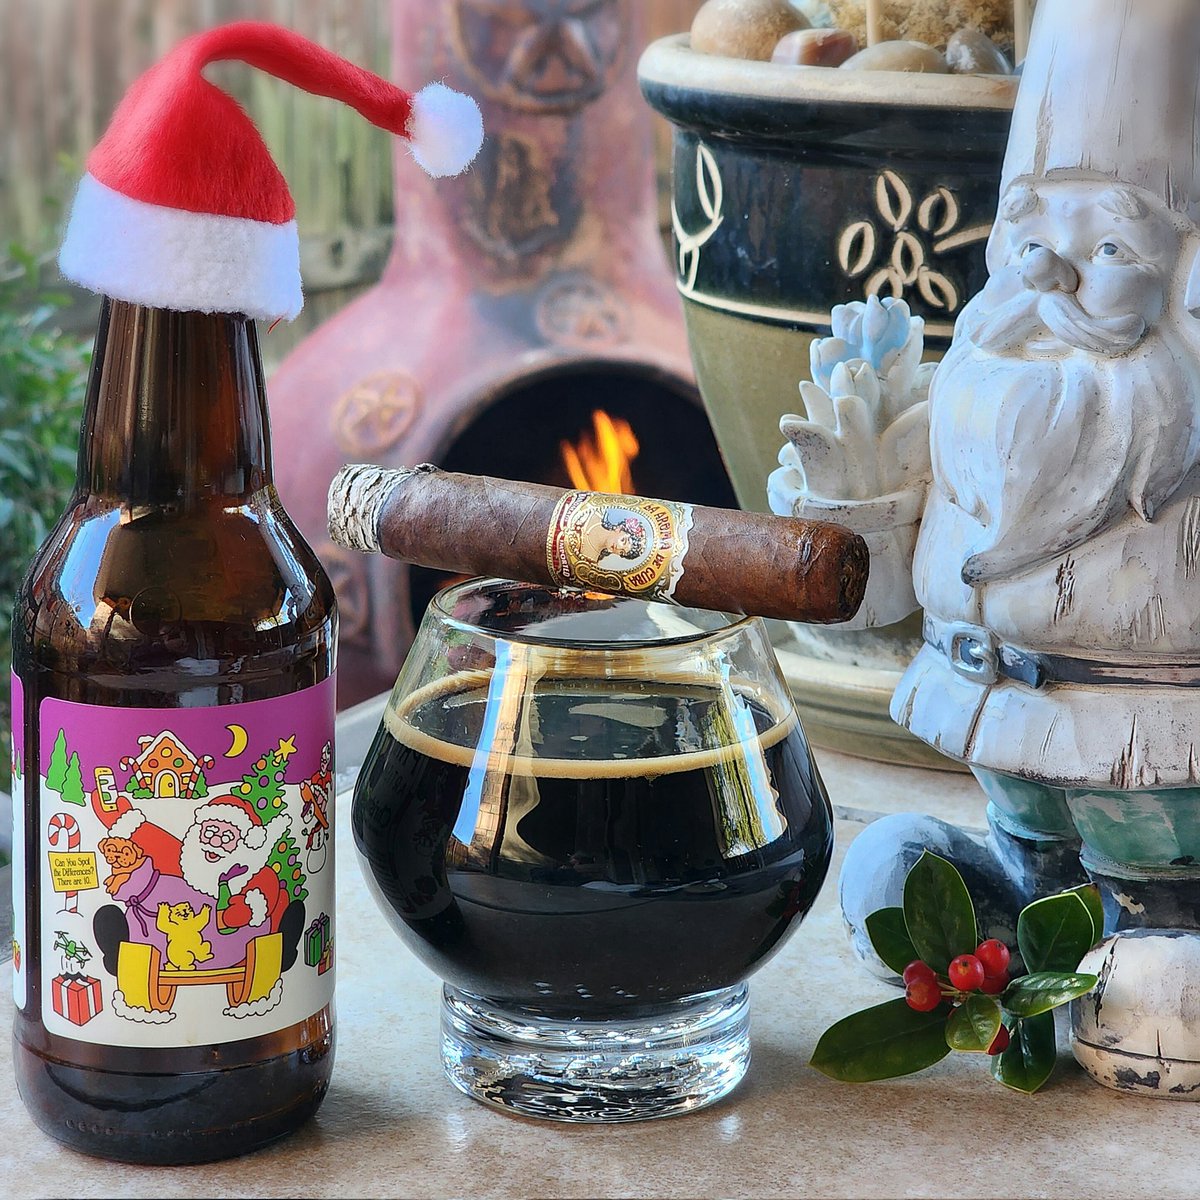 Last day on holiday so I decided to drop this bomb... Prairie Artisan Ales, Christmas Bomb, that is. 🎅🎄🍺💥 #CraftBeer & #cigar Merry & Bright, cheers 🍻